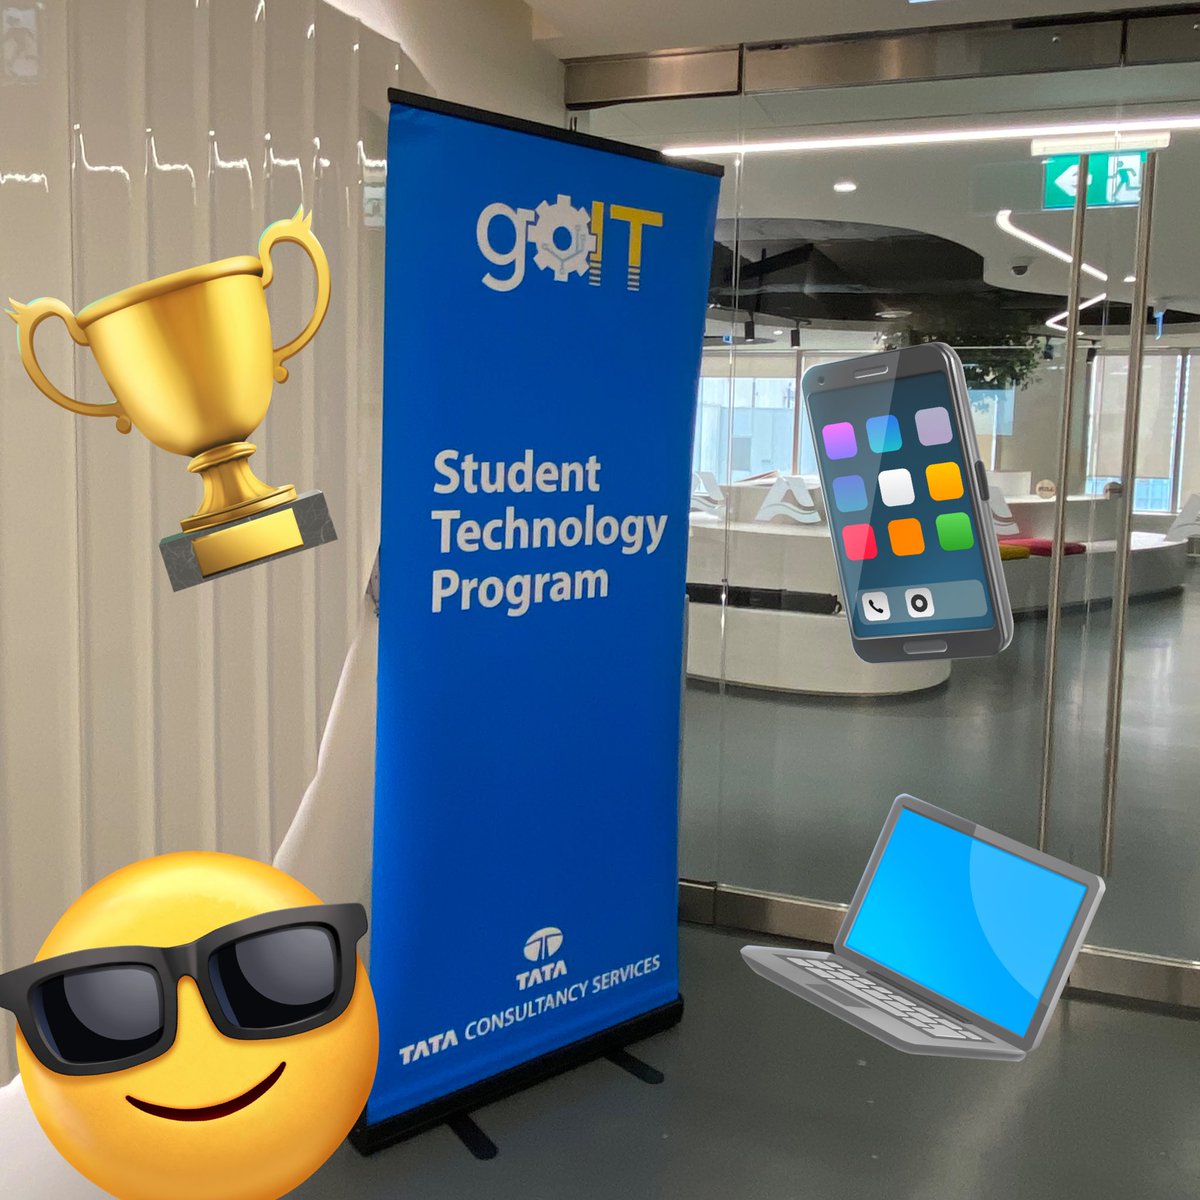 Can’t wait to celebrate the student innovations at the goIT culminating event! 

Going to be a great day seeing all the critical thinking, problem solving, inquiry and collaboration come to life!
#tdsbGC @jasontries @MsBritten1 @Singhpeter @DeniseDePaola1